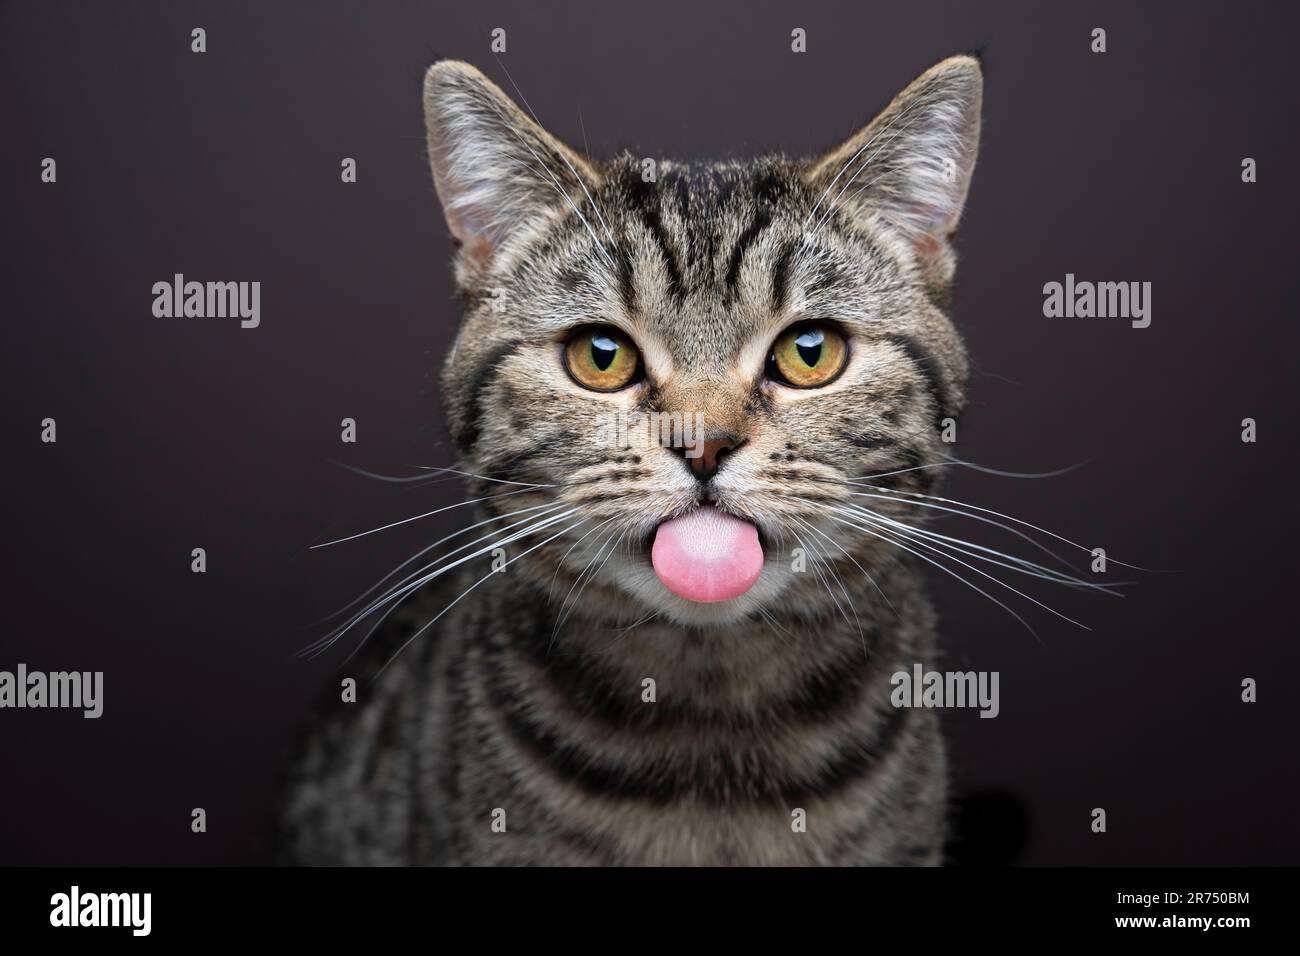 cute mischievous tabby cat sticking out tongue looking at camera. funny studio portrait on brown background Stock Photo